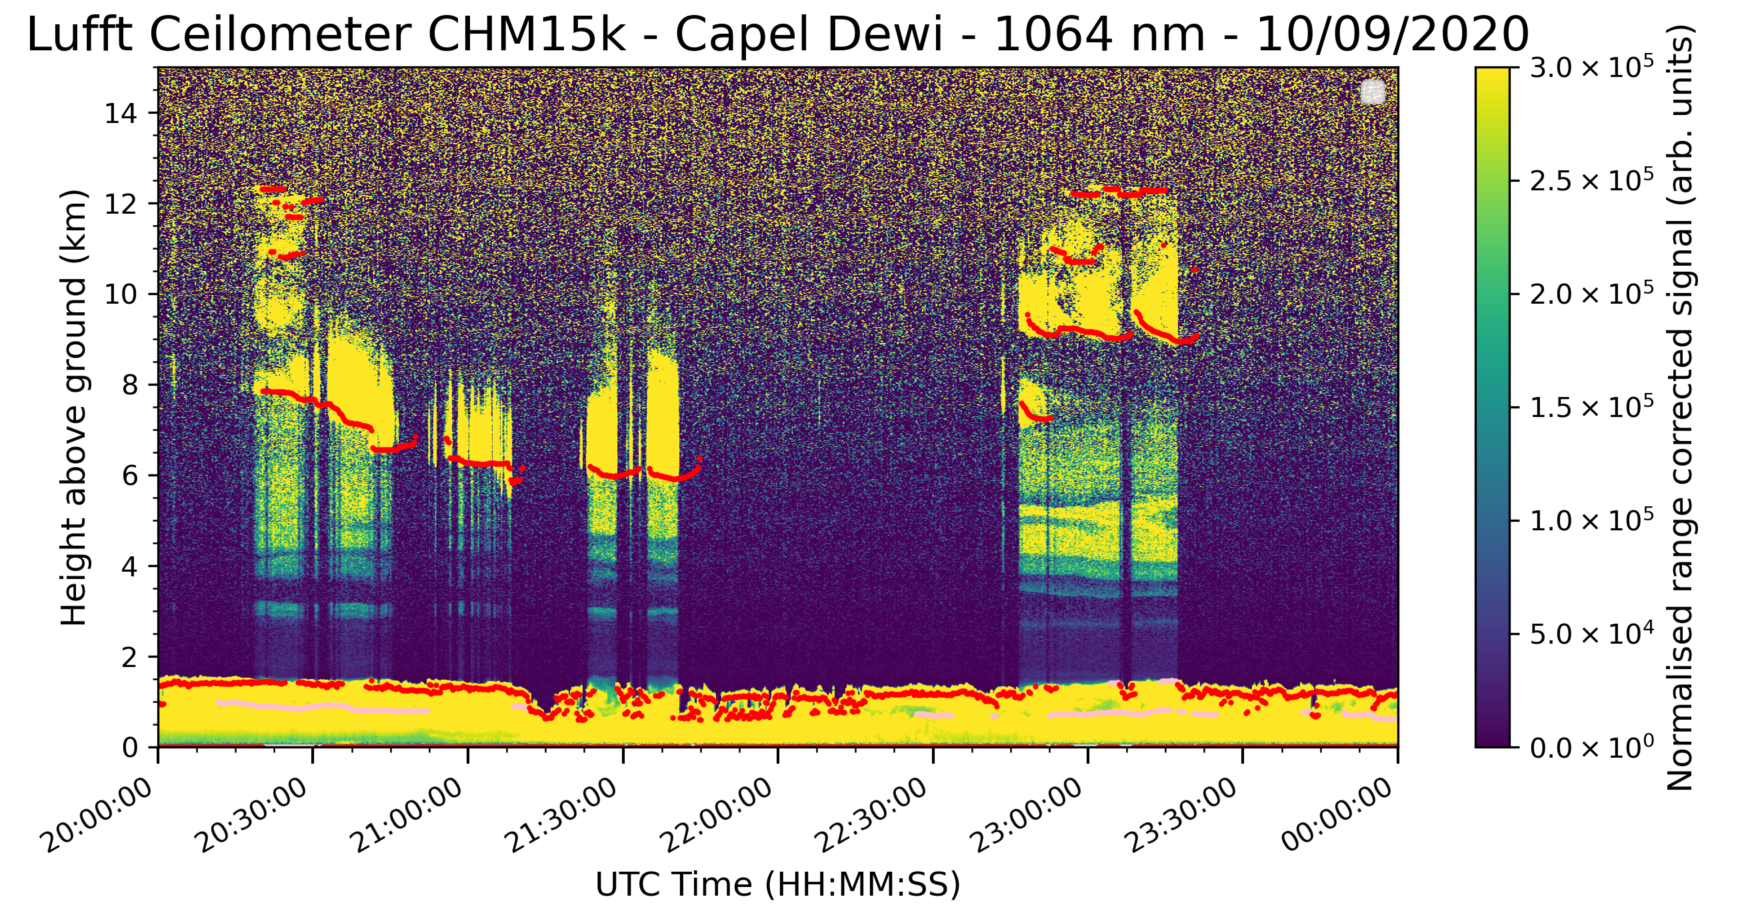 Smoke detected in Capel Dewi/Wales on September 10. The signal below the clouds is caused by smoke.